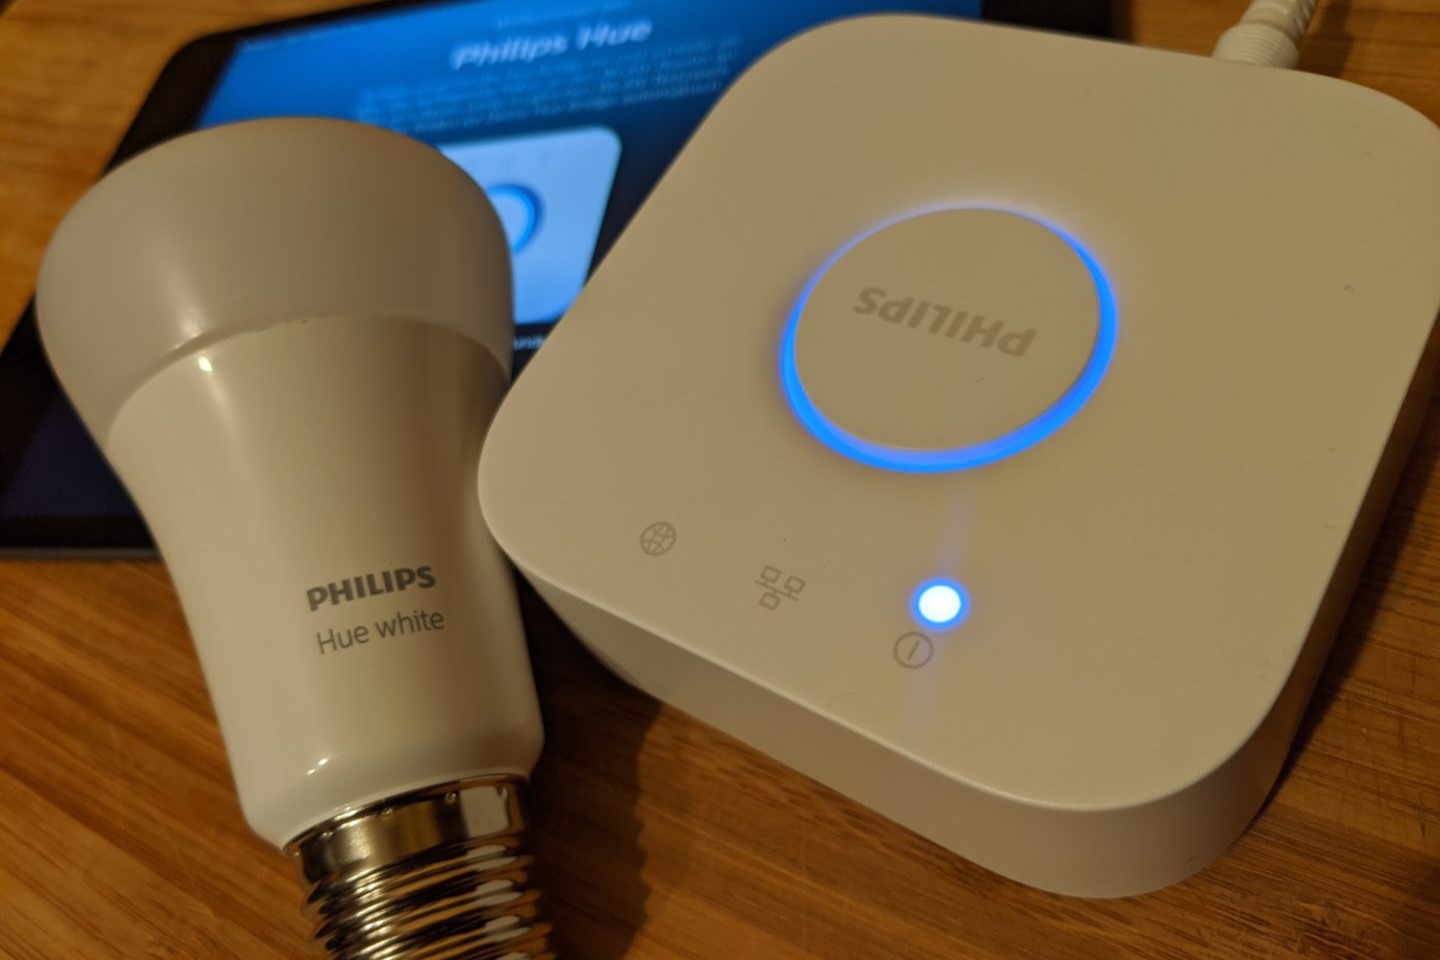 Philips Hue: How To Connect My Bridge